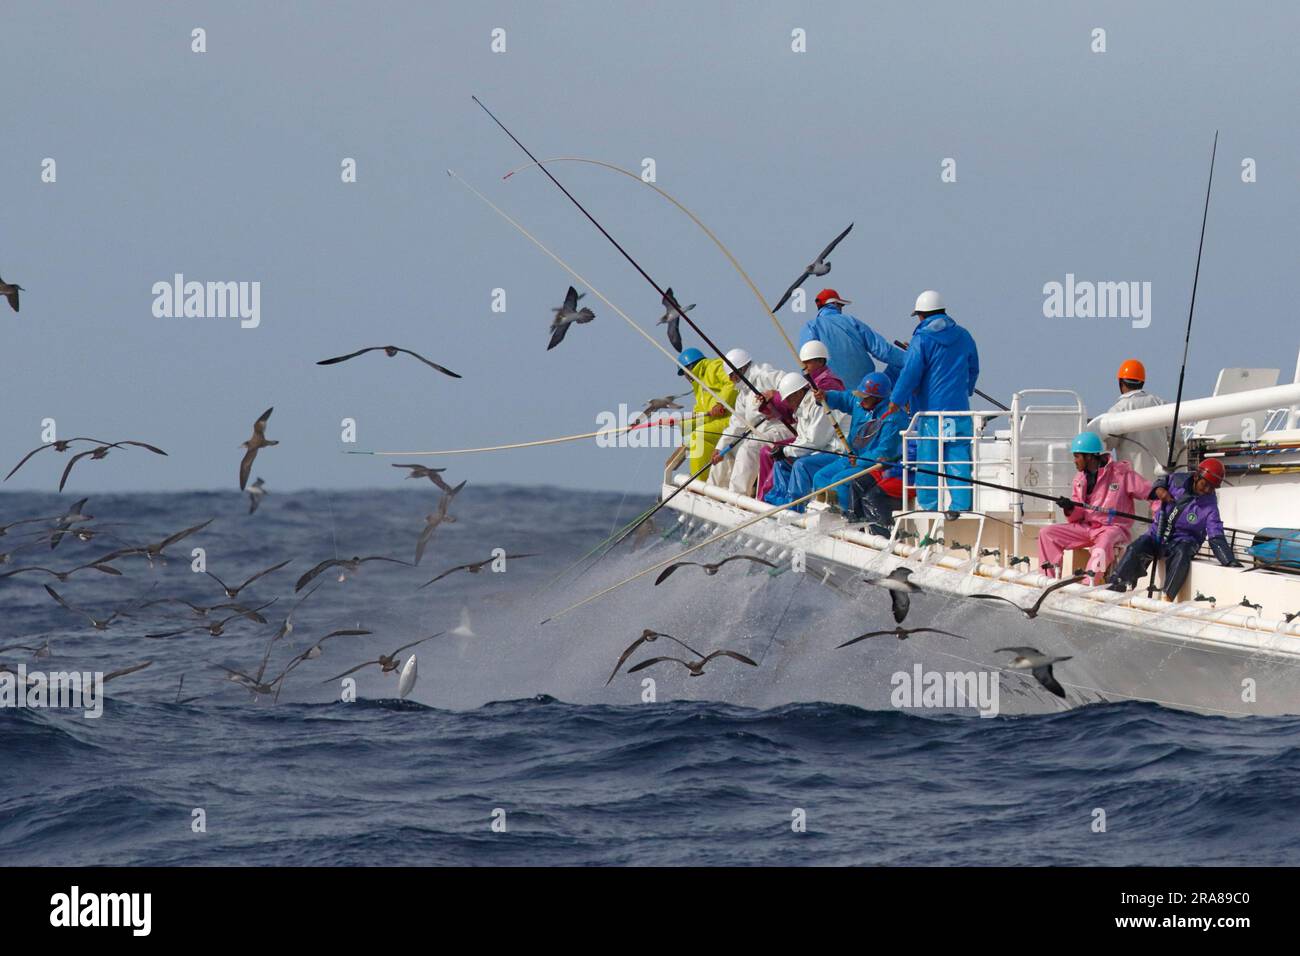 Pacific yellowtail caught on fishing hook in ocean Stock Photo - Alamy